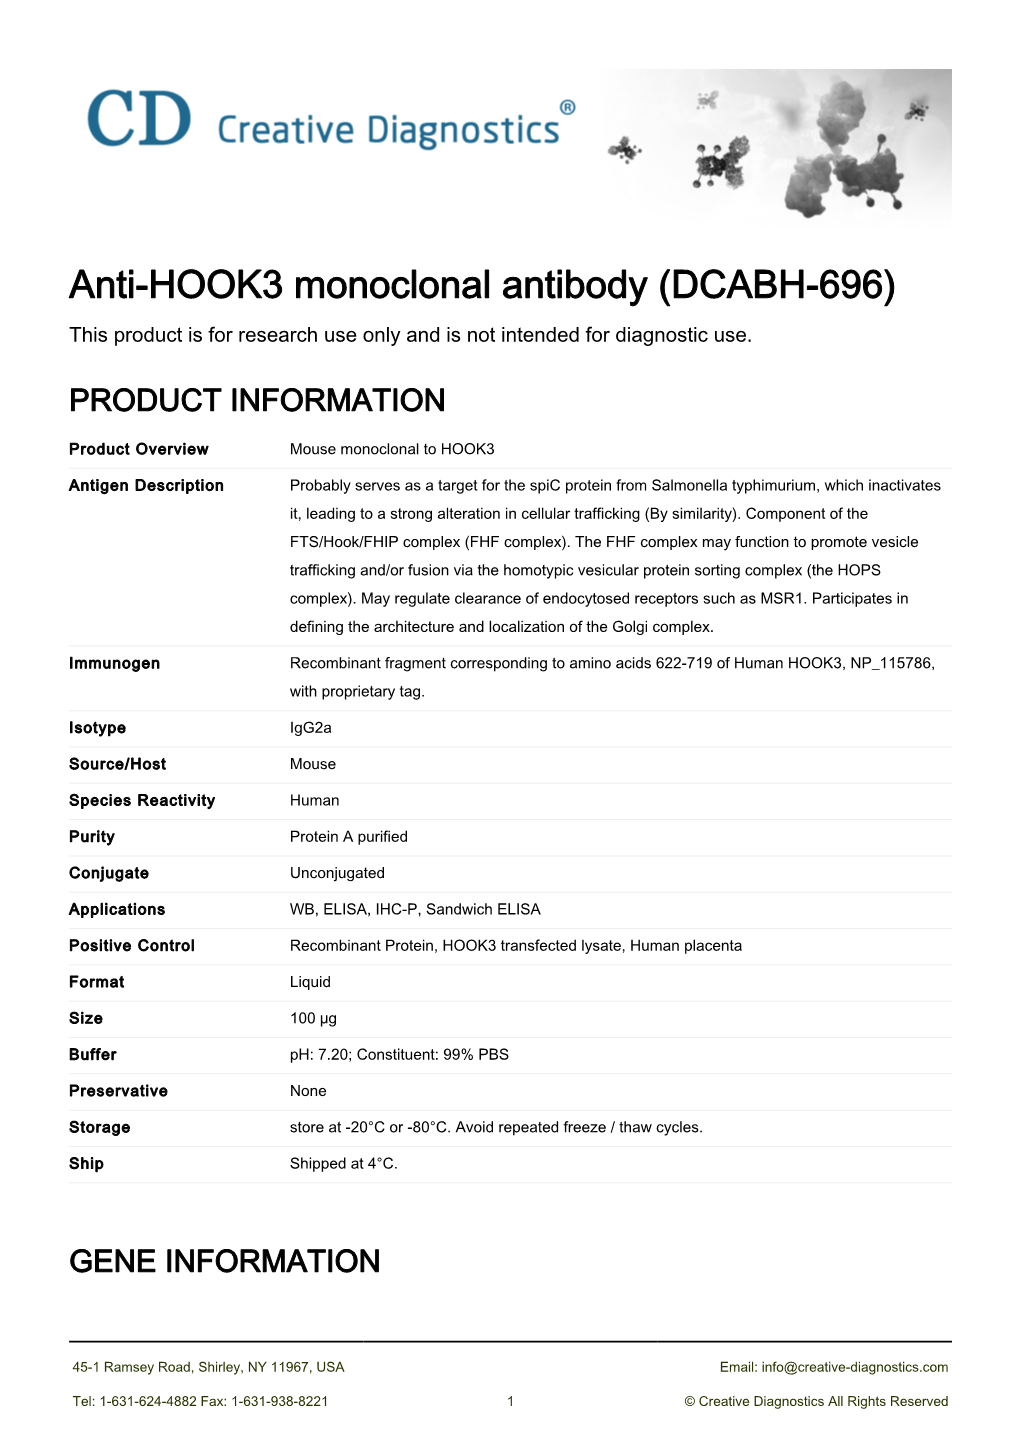 Anti-HOOK3 Monoclonal Antibody (DCABH-696) This Product Is for Research Use Only and Is Not Intended for Diagnostic Use